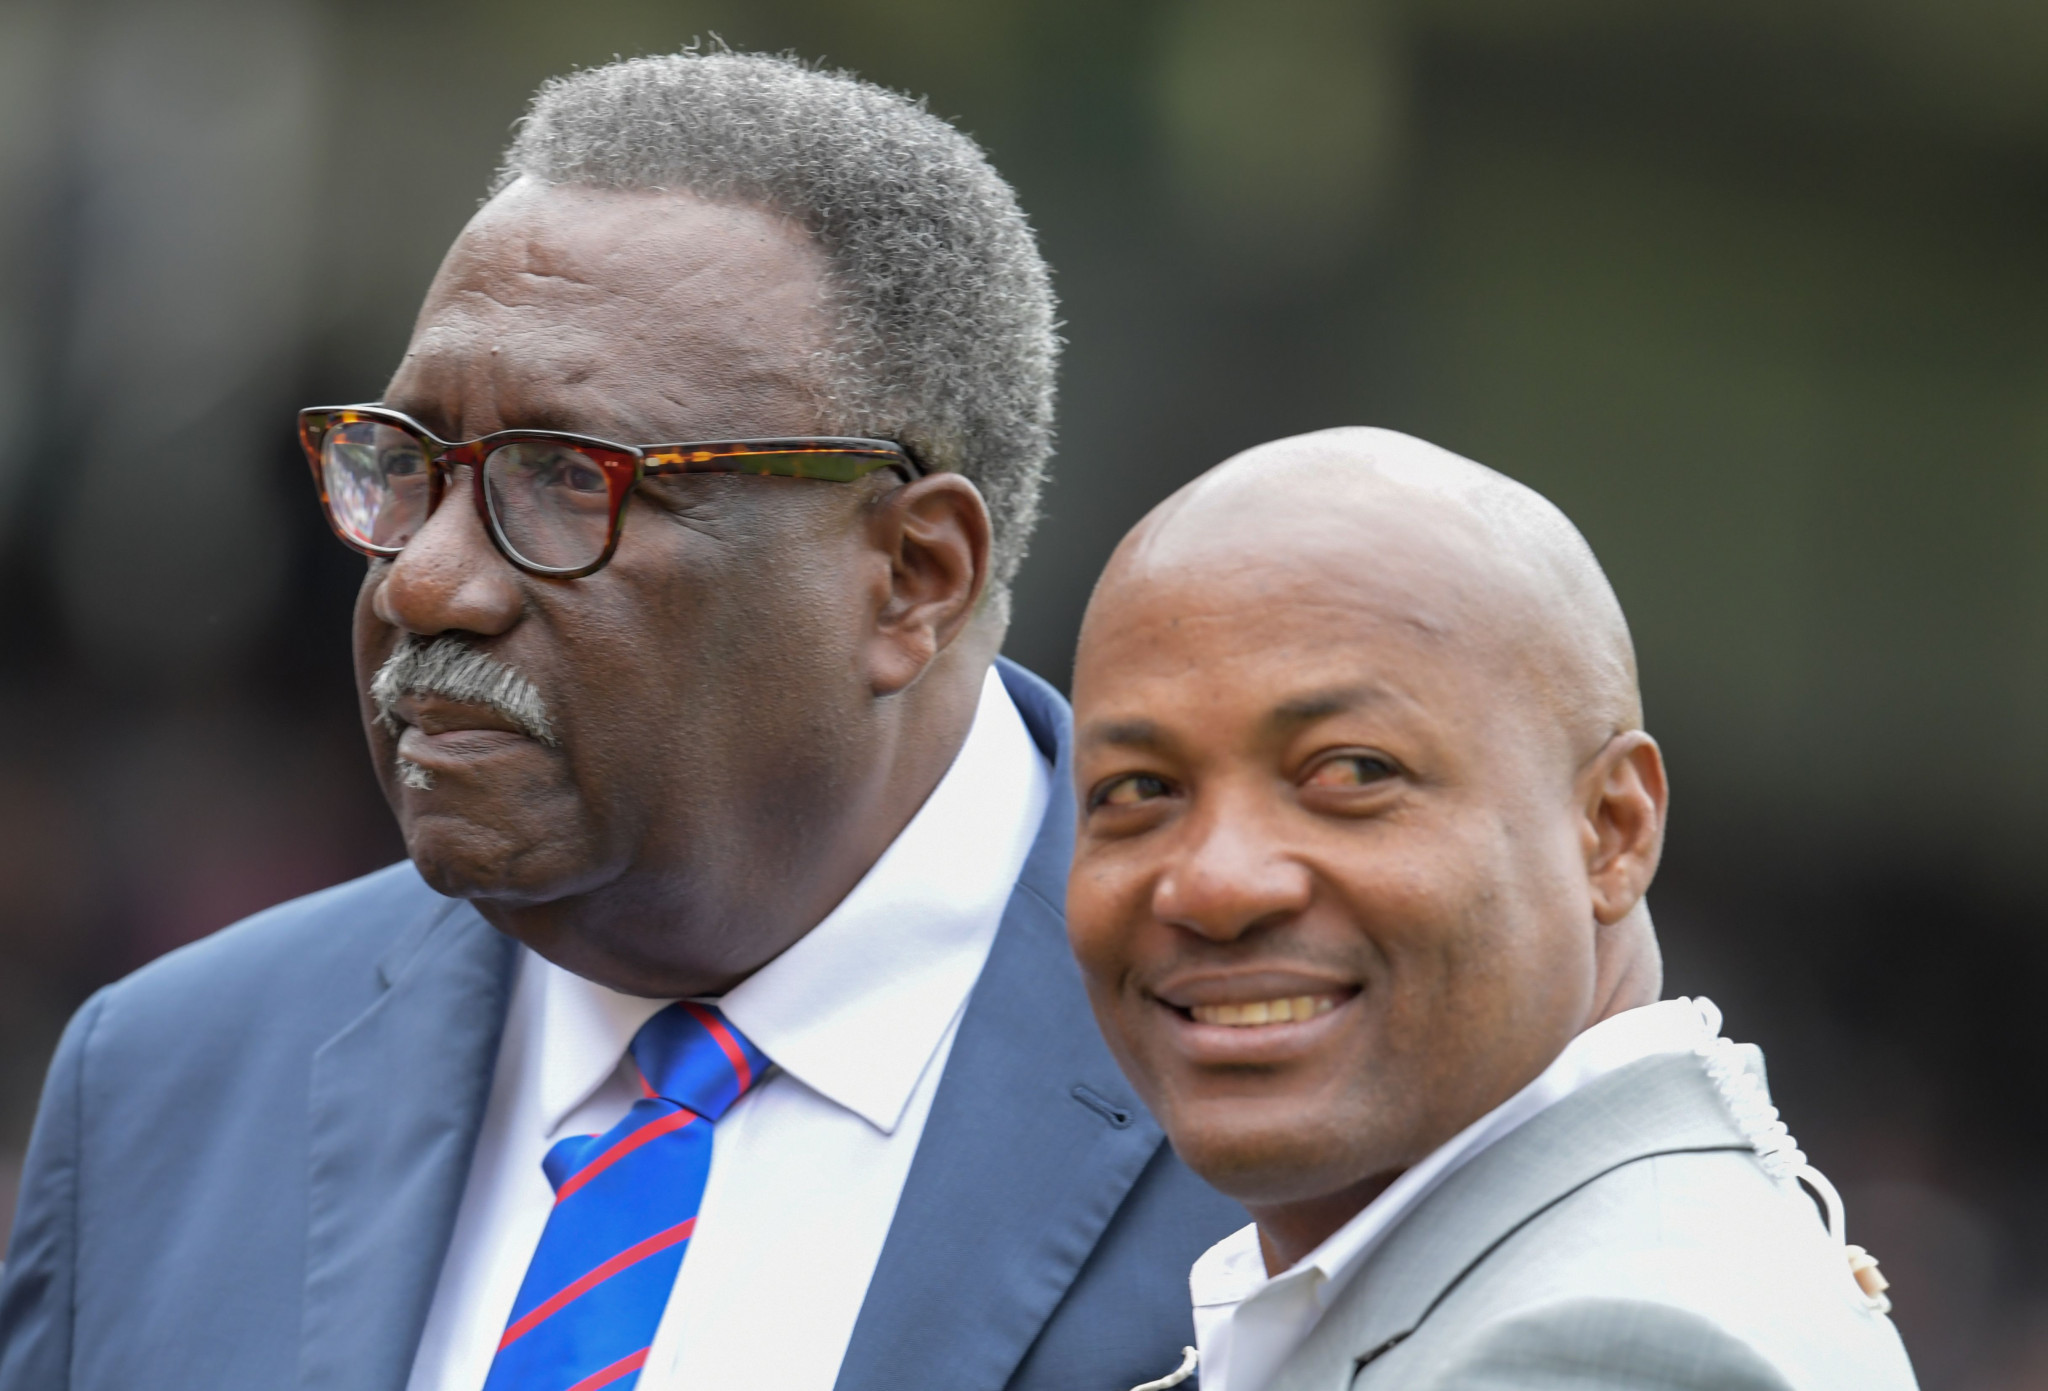 Clive Lloyd, pictured left, has been given a knighthood in the New Year Honours list ©Getty Images